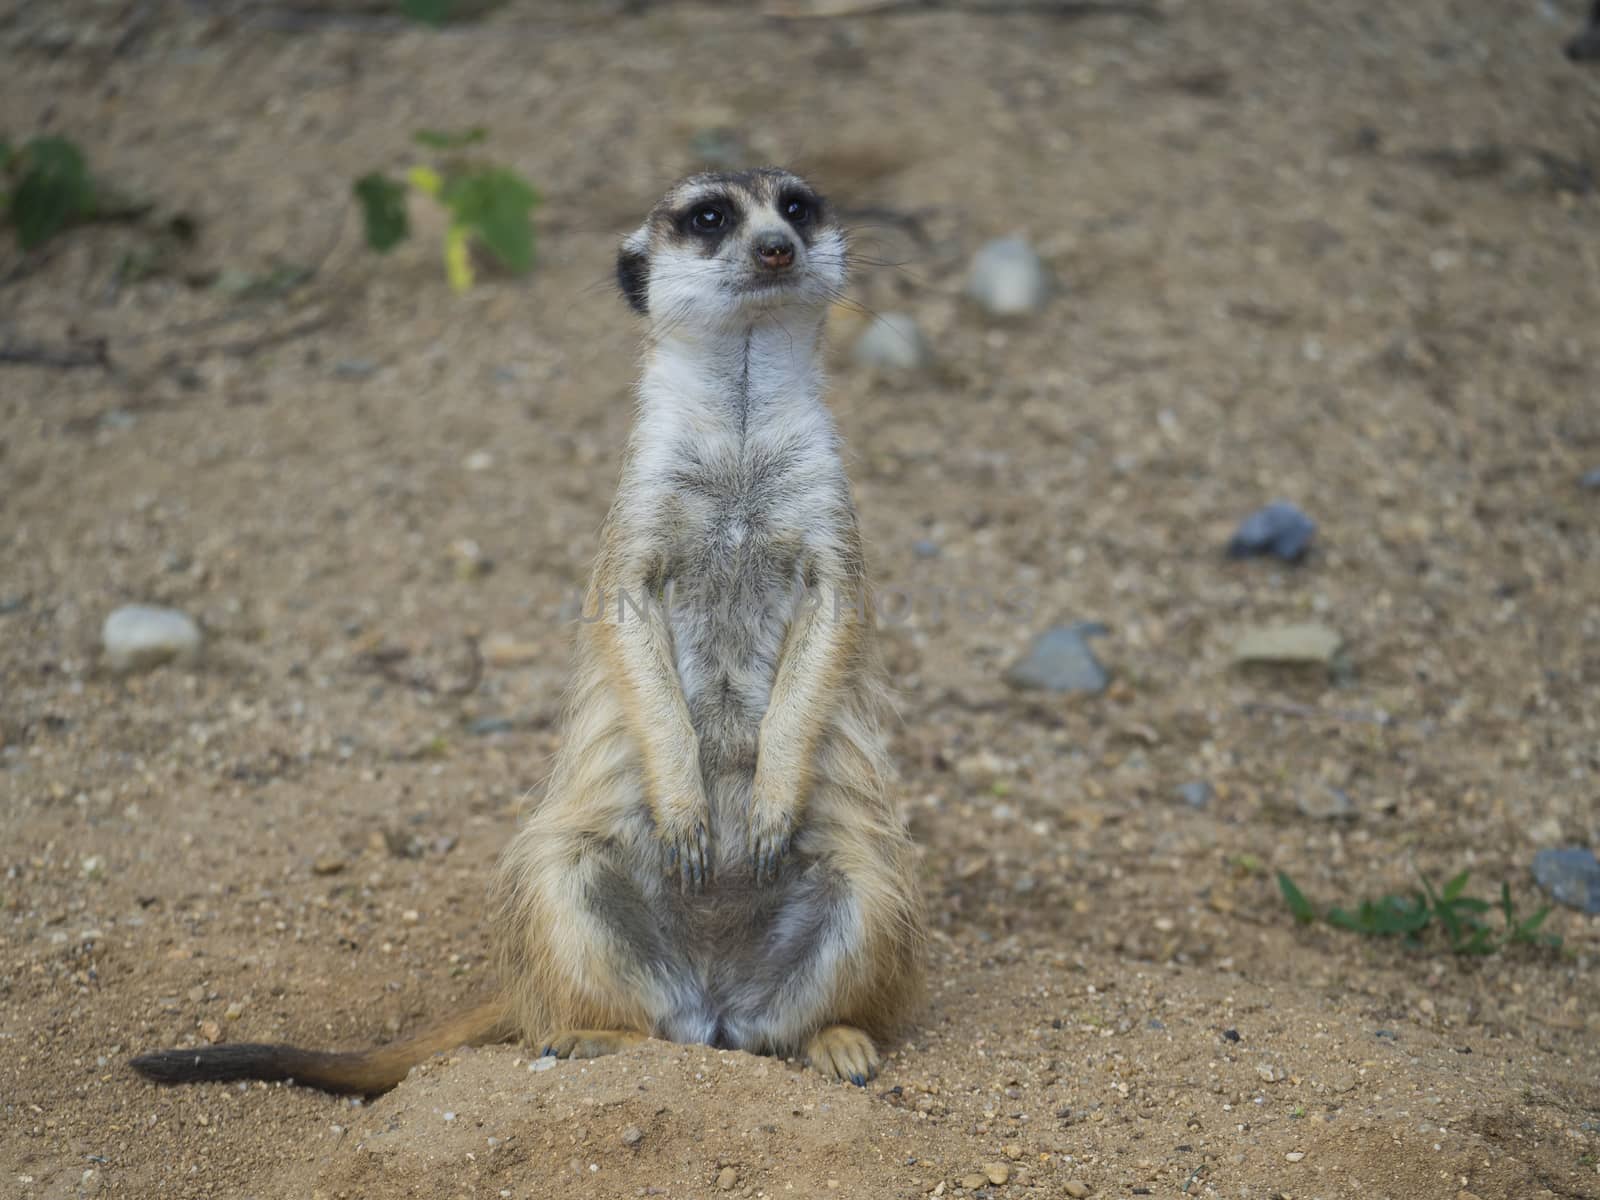 Close up portrait of standing meerkat or suricate, Suricata suricatta frontal view, looking to the camera, selective focus, copy space for text.